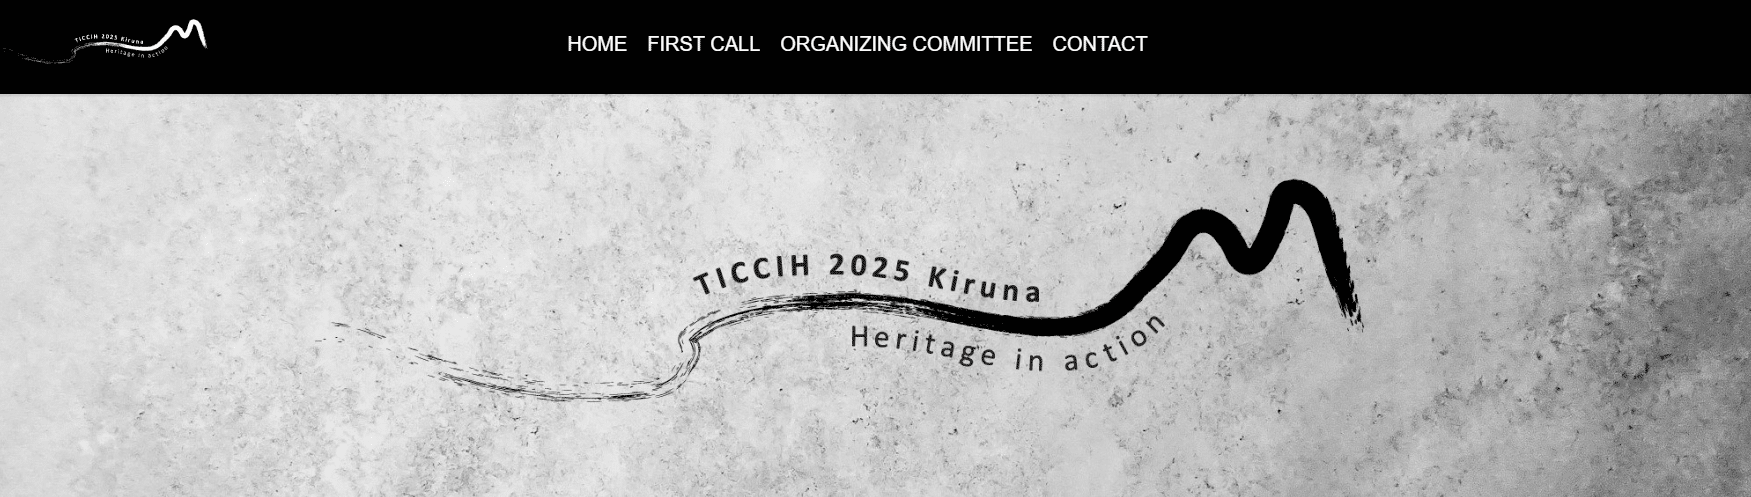 TICCIH Congress  2025 (Heritage in action) – The International Committee for the Conservation of the Industrial Heritage